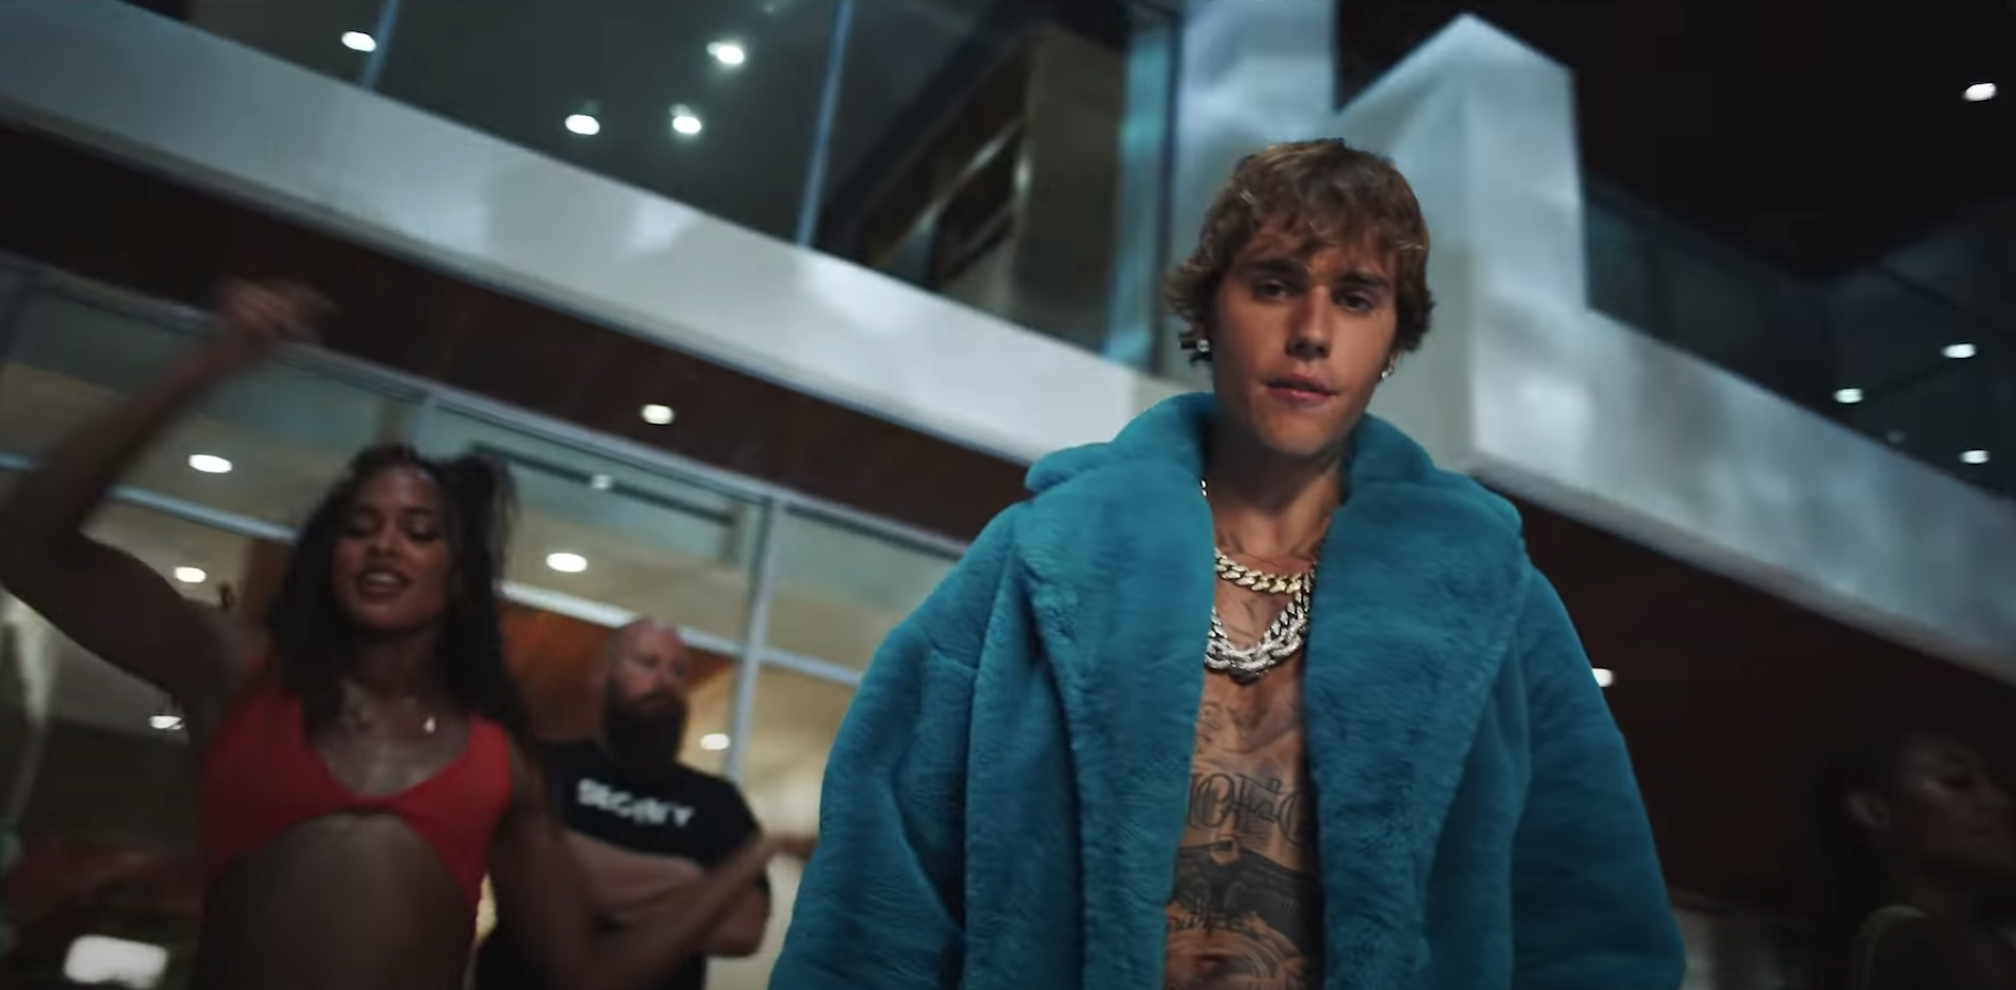 Justin wears an oversized fur coat among other dancers 